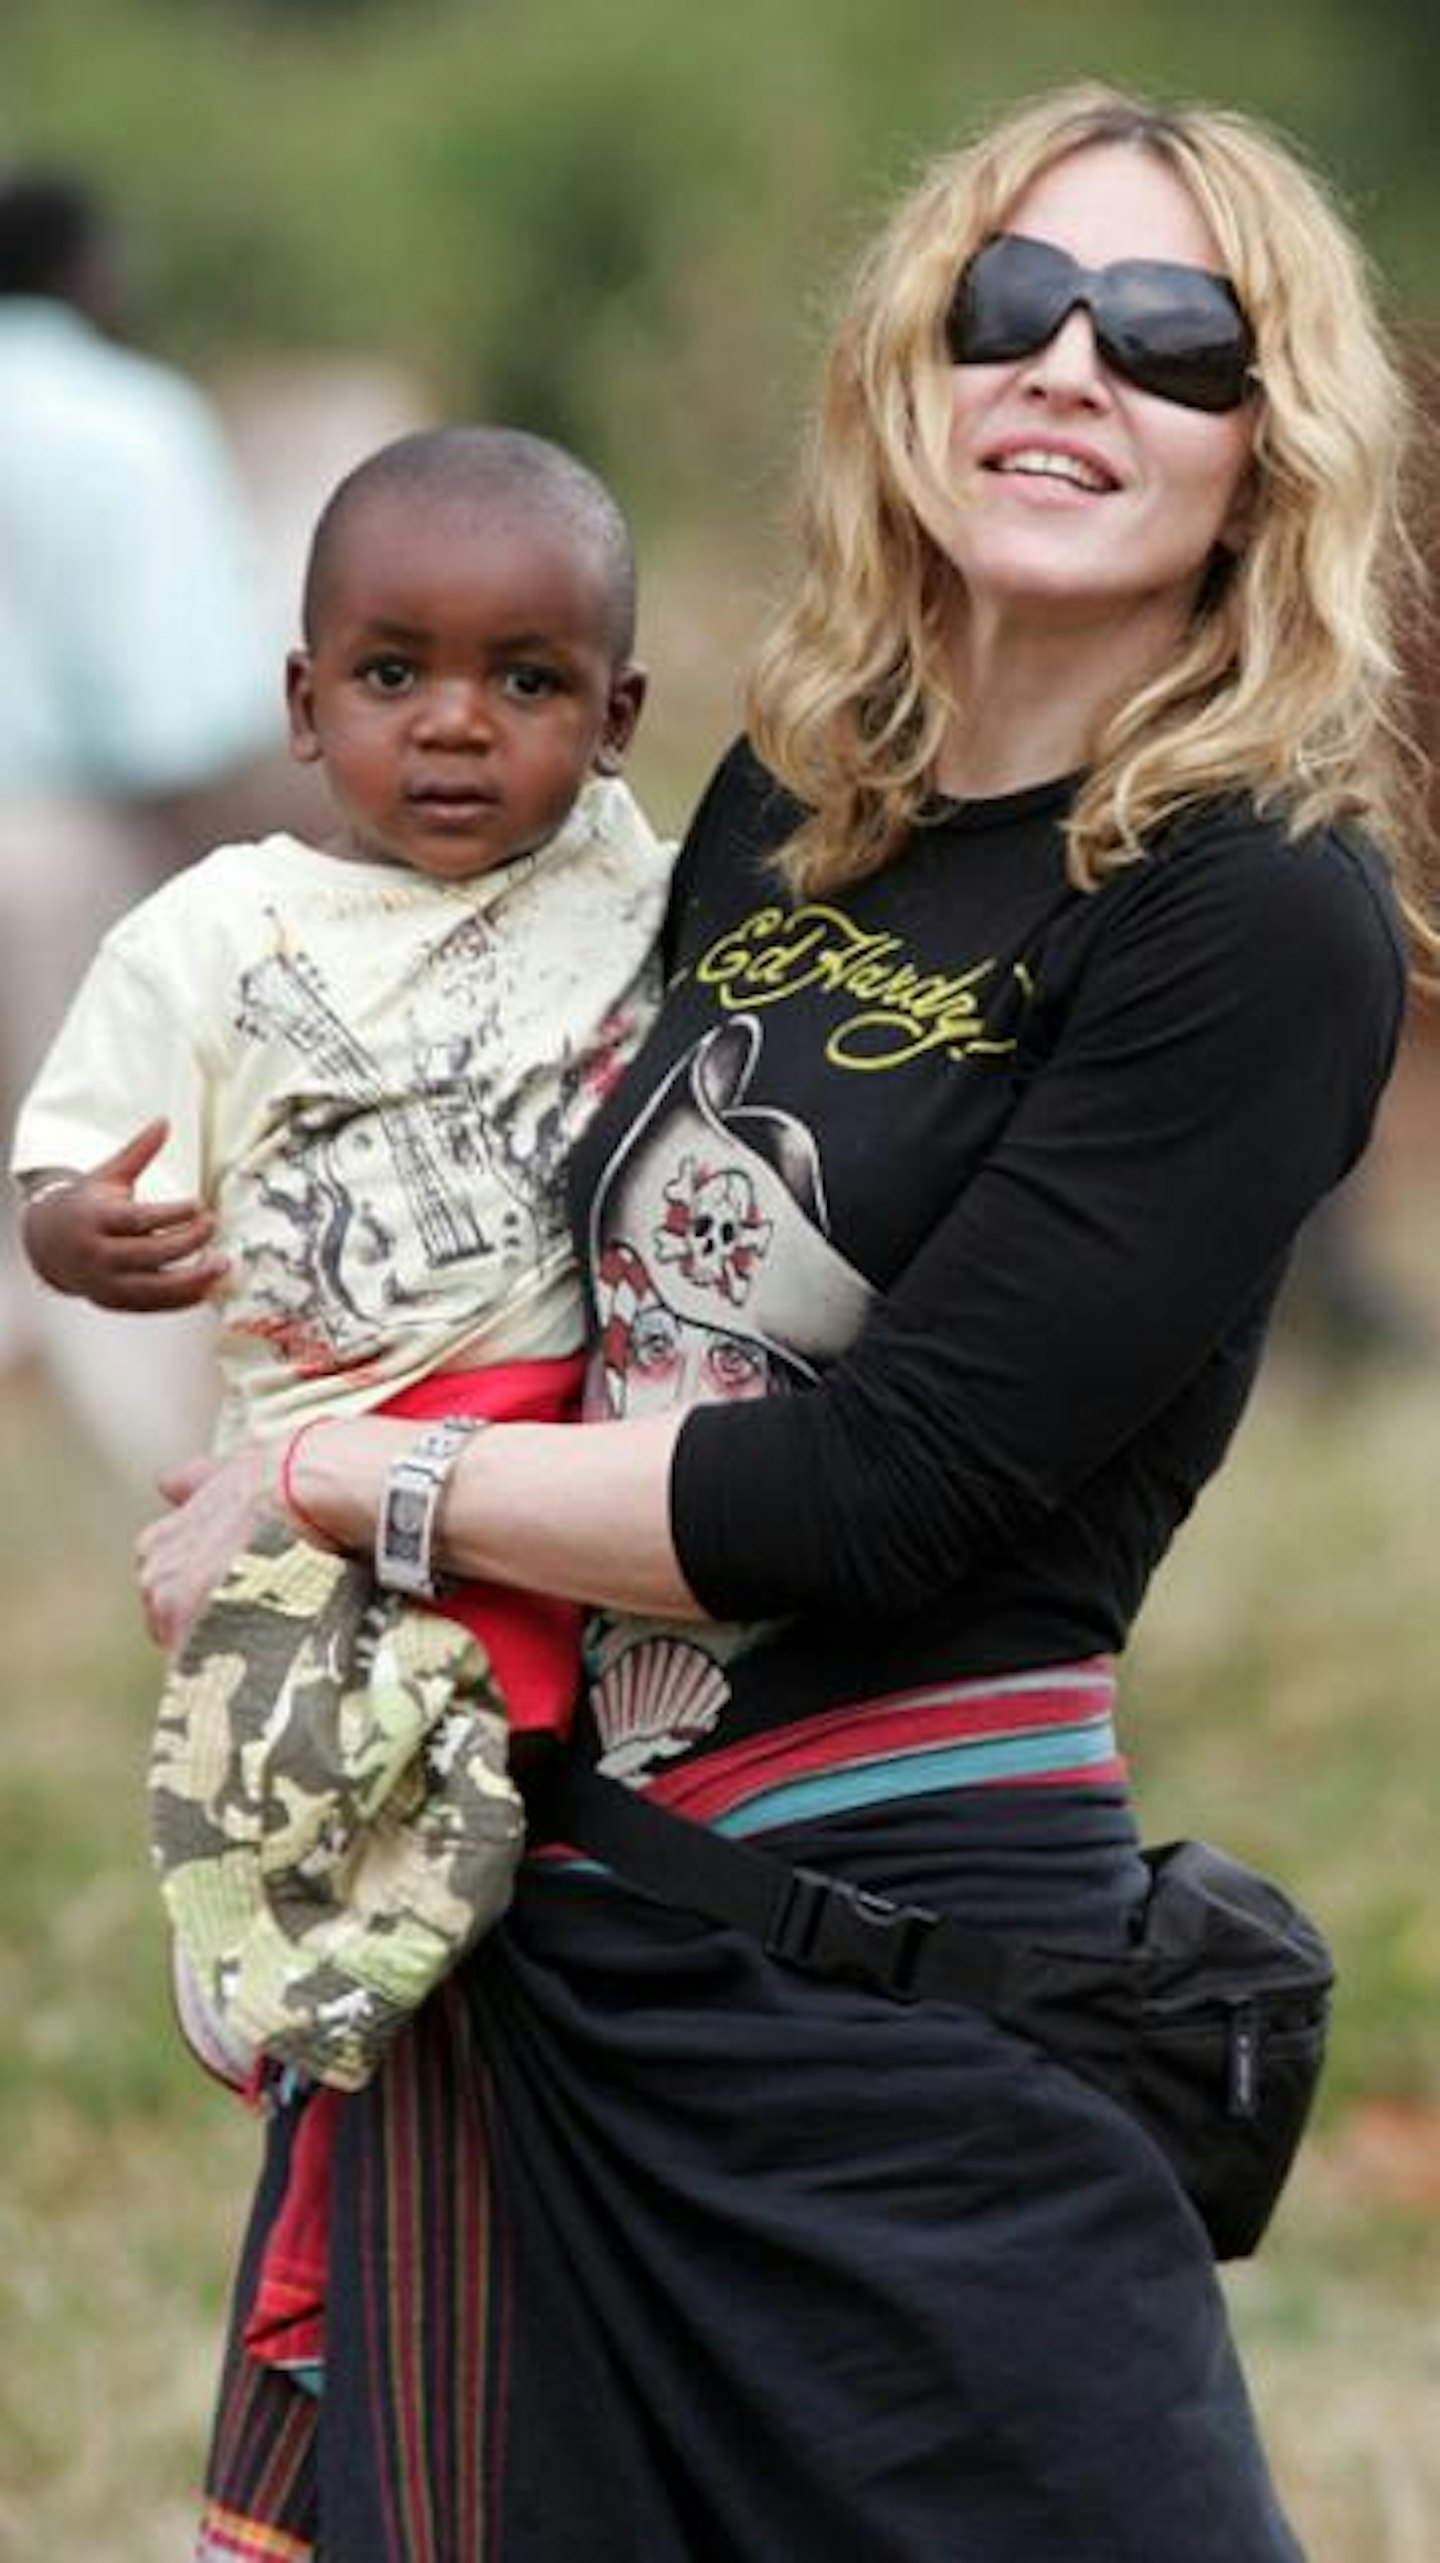 Madonna pictured with her son in Malawi back in 2006